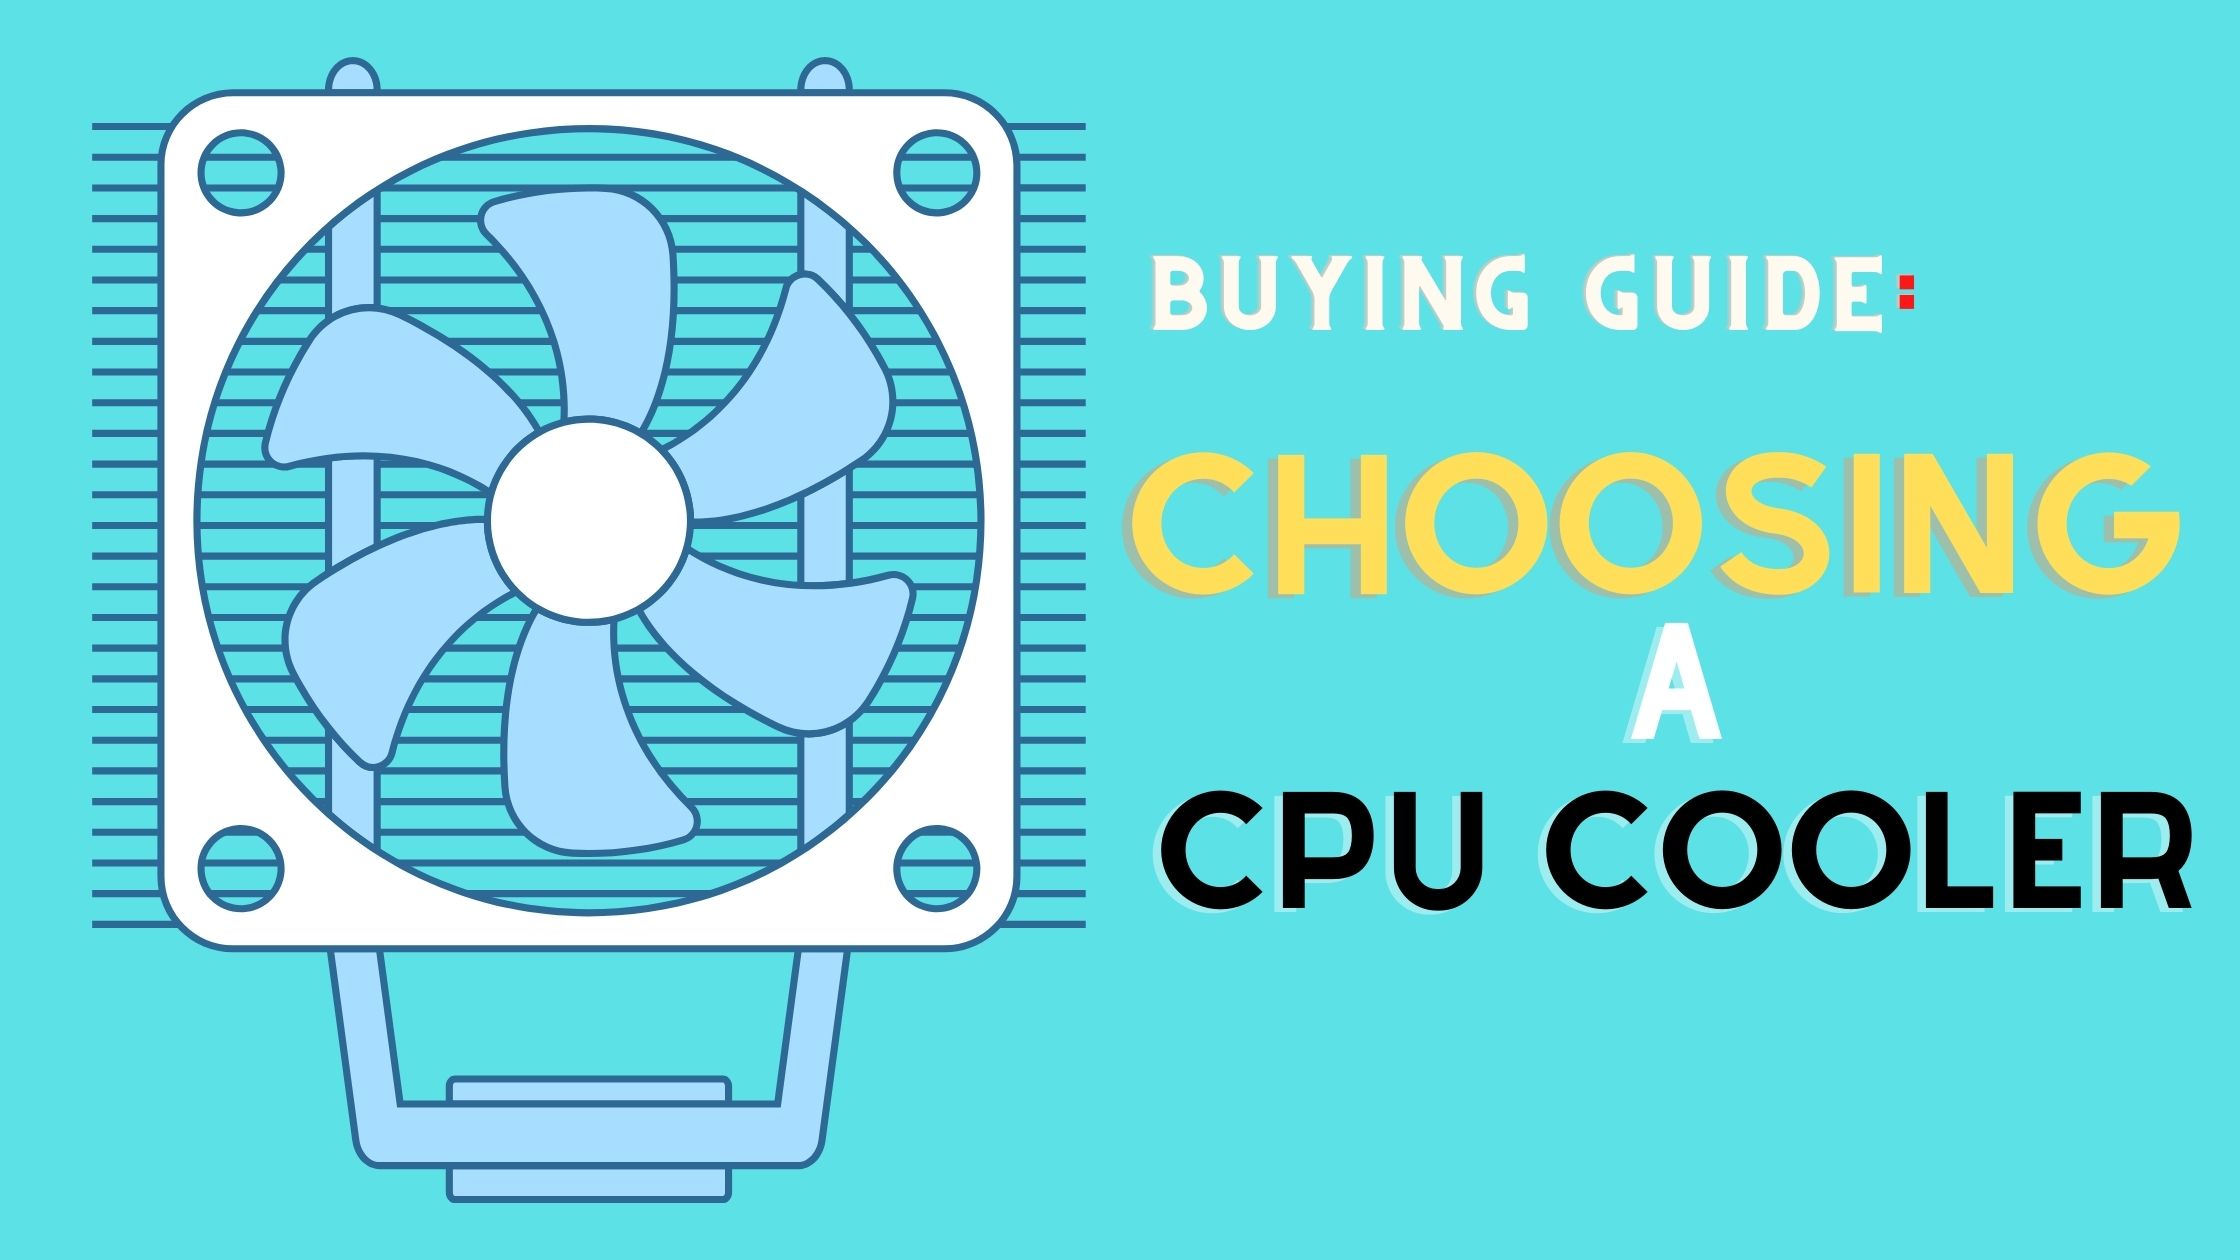 Buying Guide: Choosing the right CPU cooler for your needs!